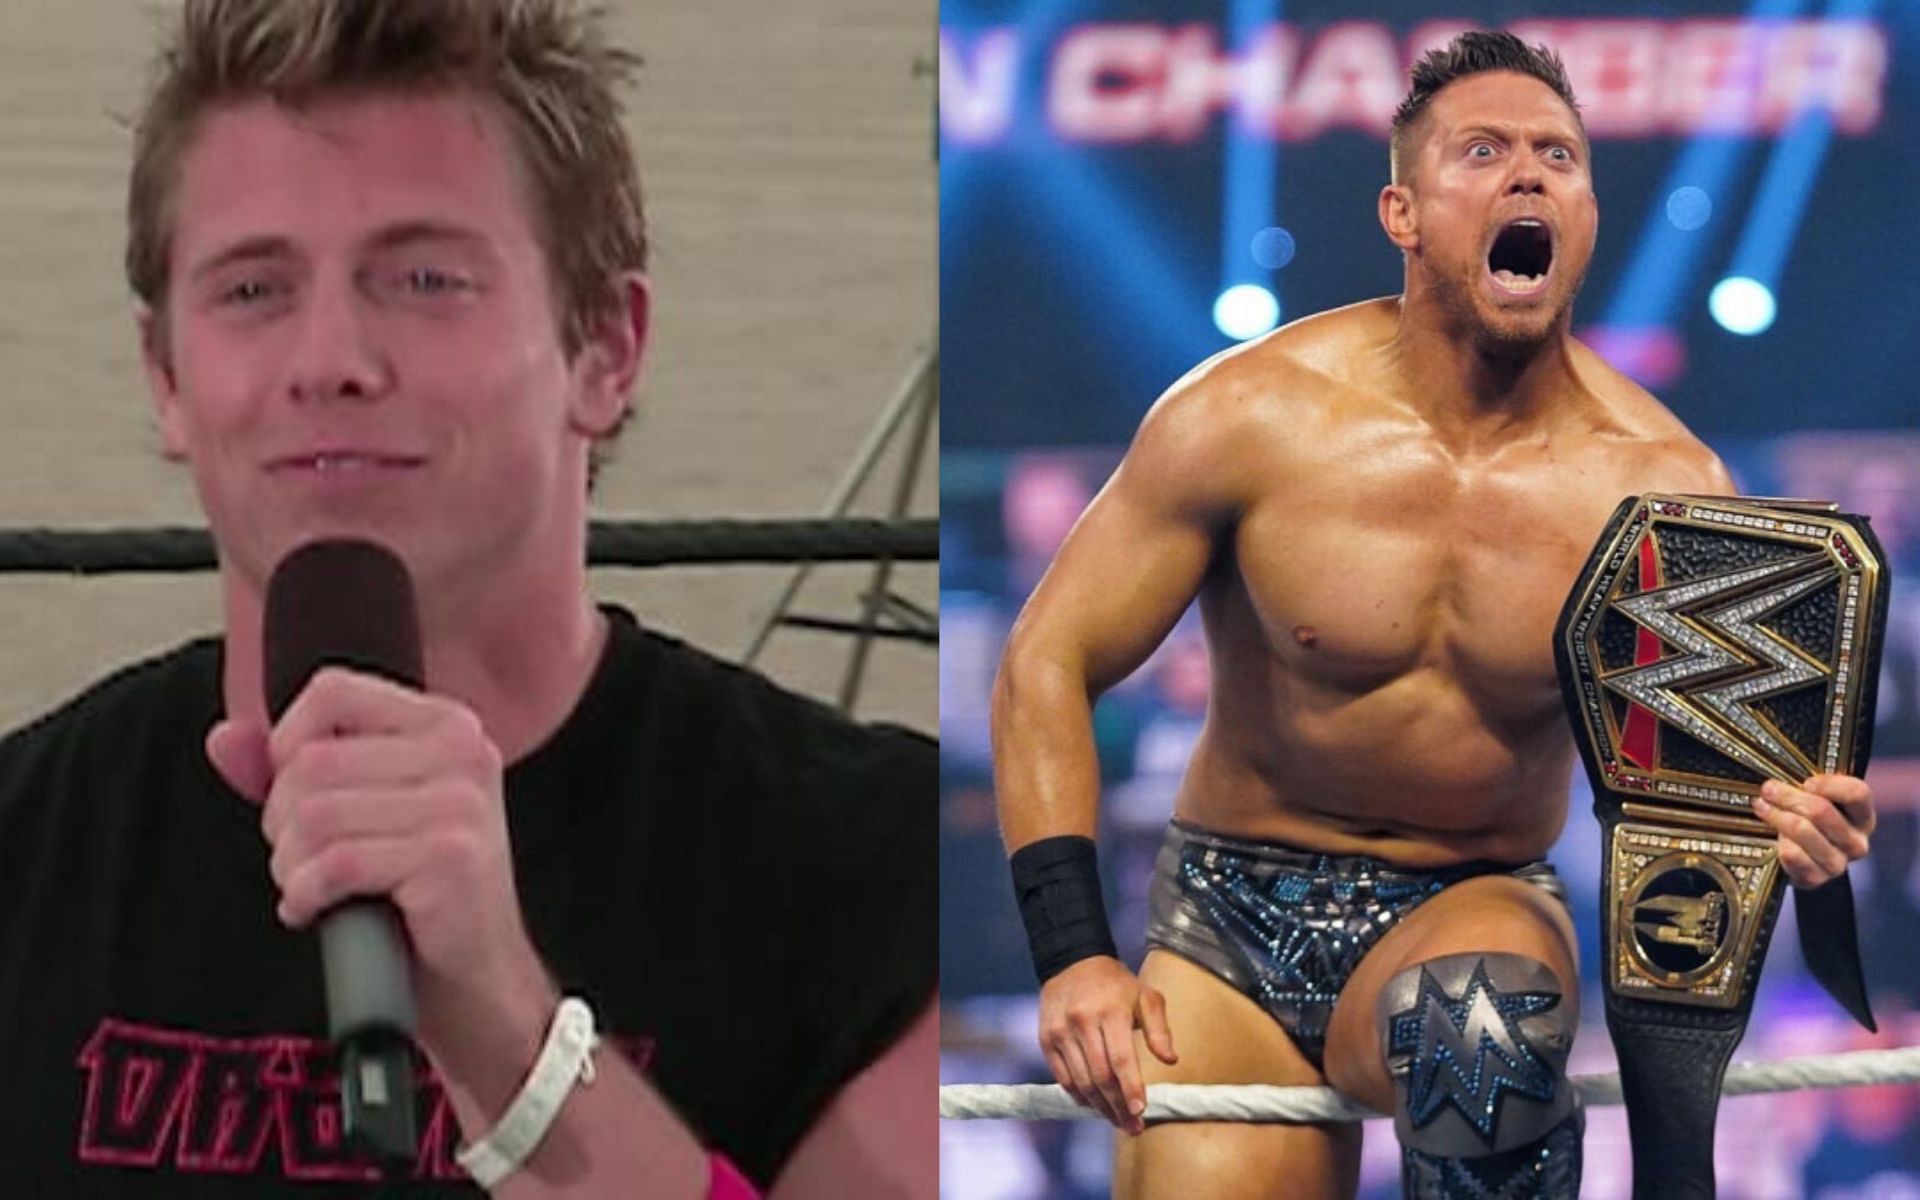 Before and after, former Tough Enough contestant The Miz